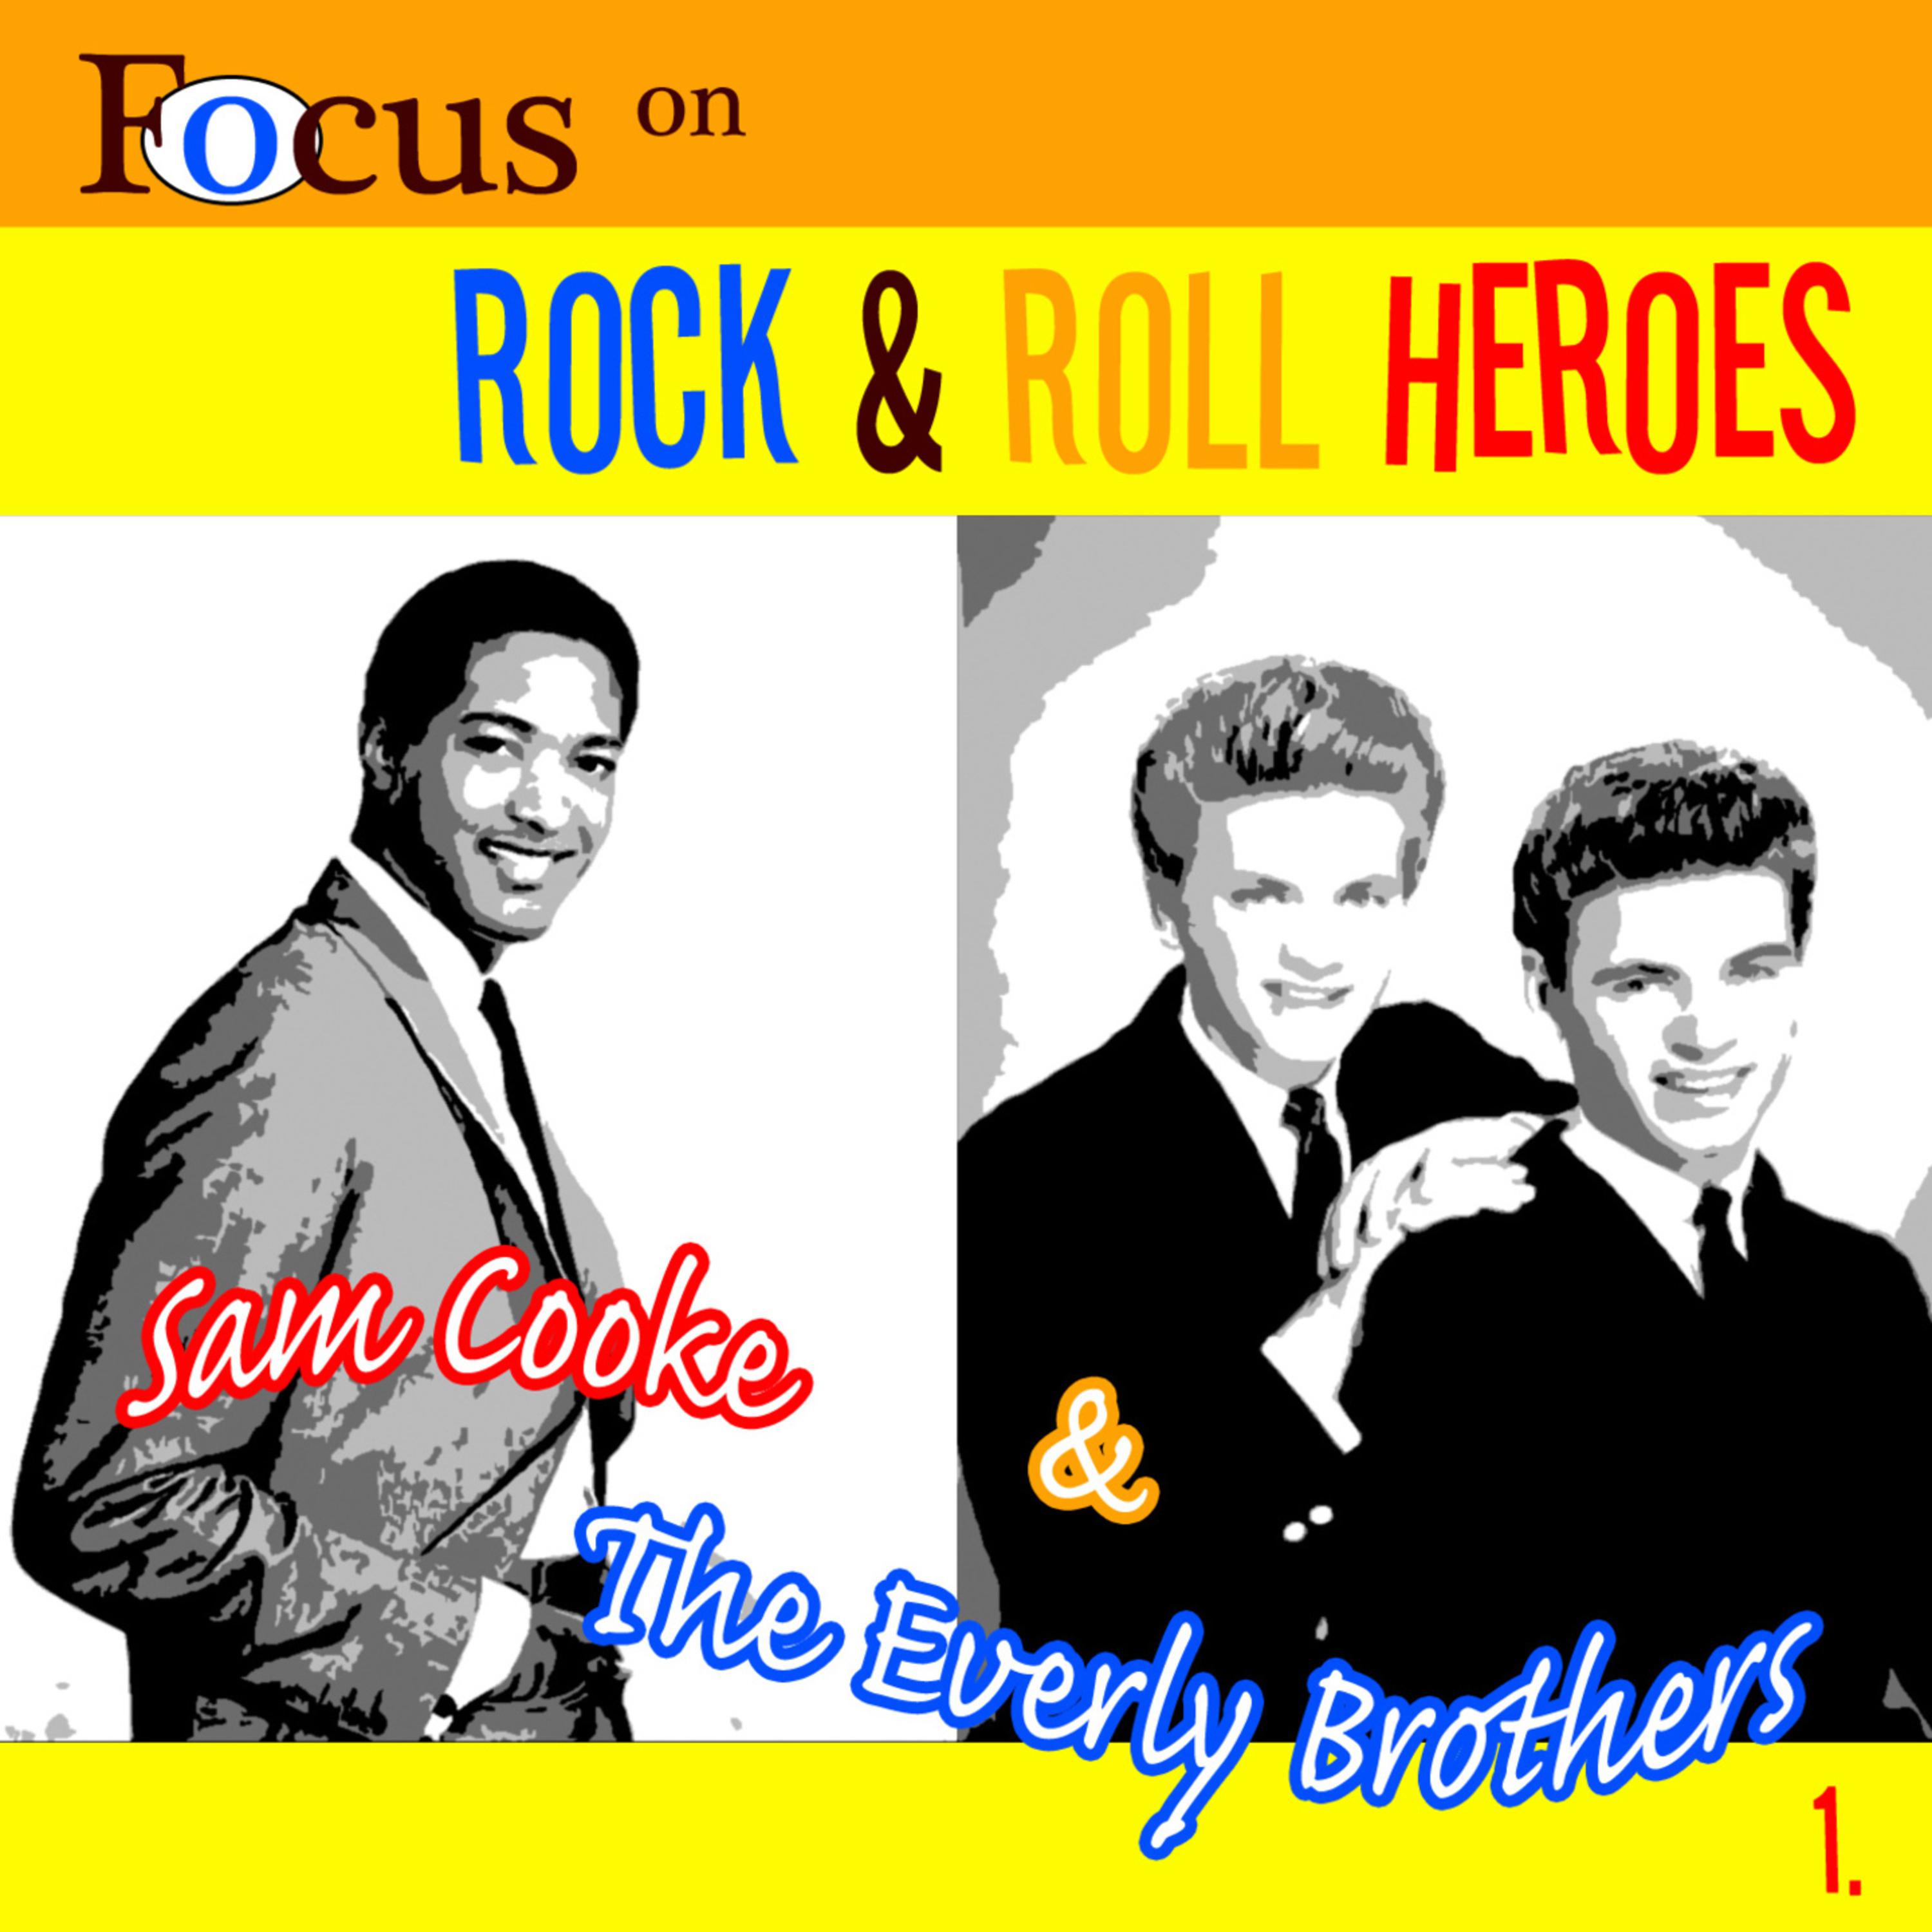 Focus On Rock & Pop Heroes - Sam Cooke & The Everley Brothers 1